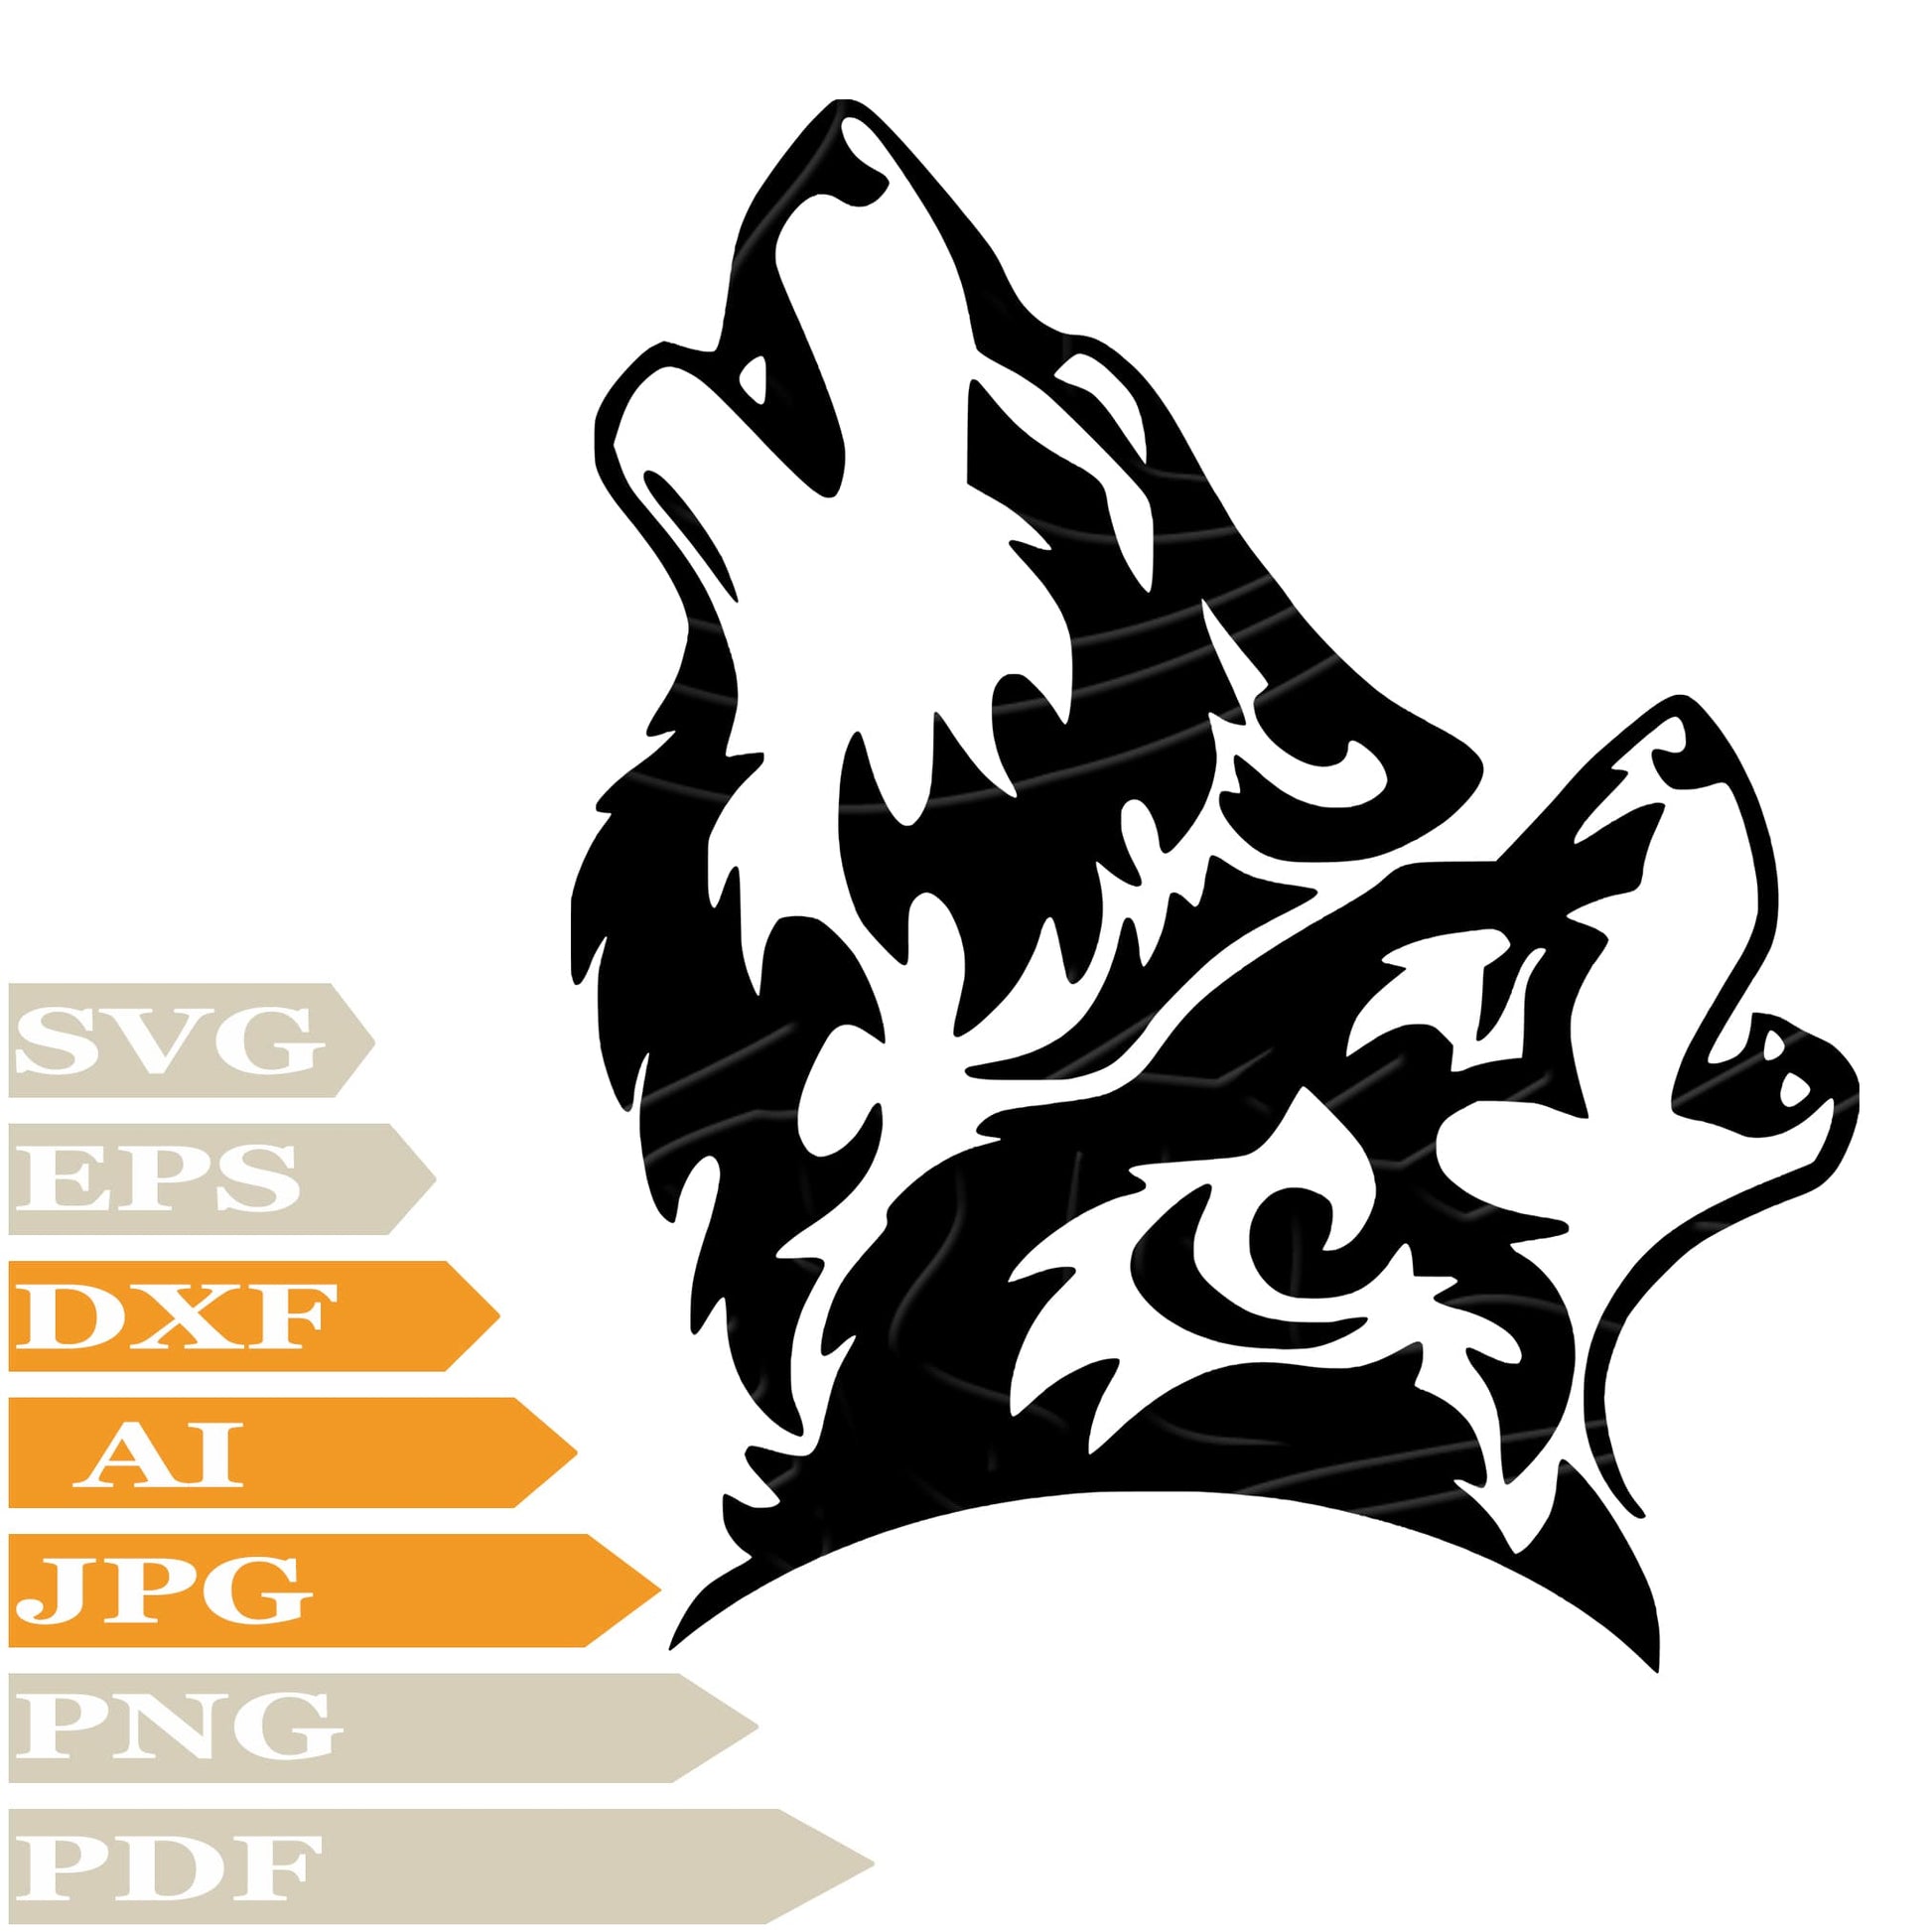 sofvintage-Wolf SVG, Wolves SVG File, Wolf Head SVG Design, Wild Wolves Vector Cut File For Cricut, PNG, Clip Art, T–Shirt, Wall Sticker, Printable, Tattoo, Silhouette